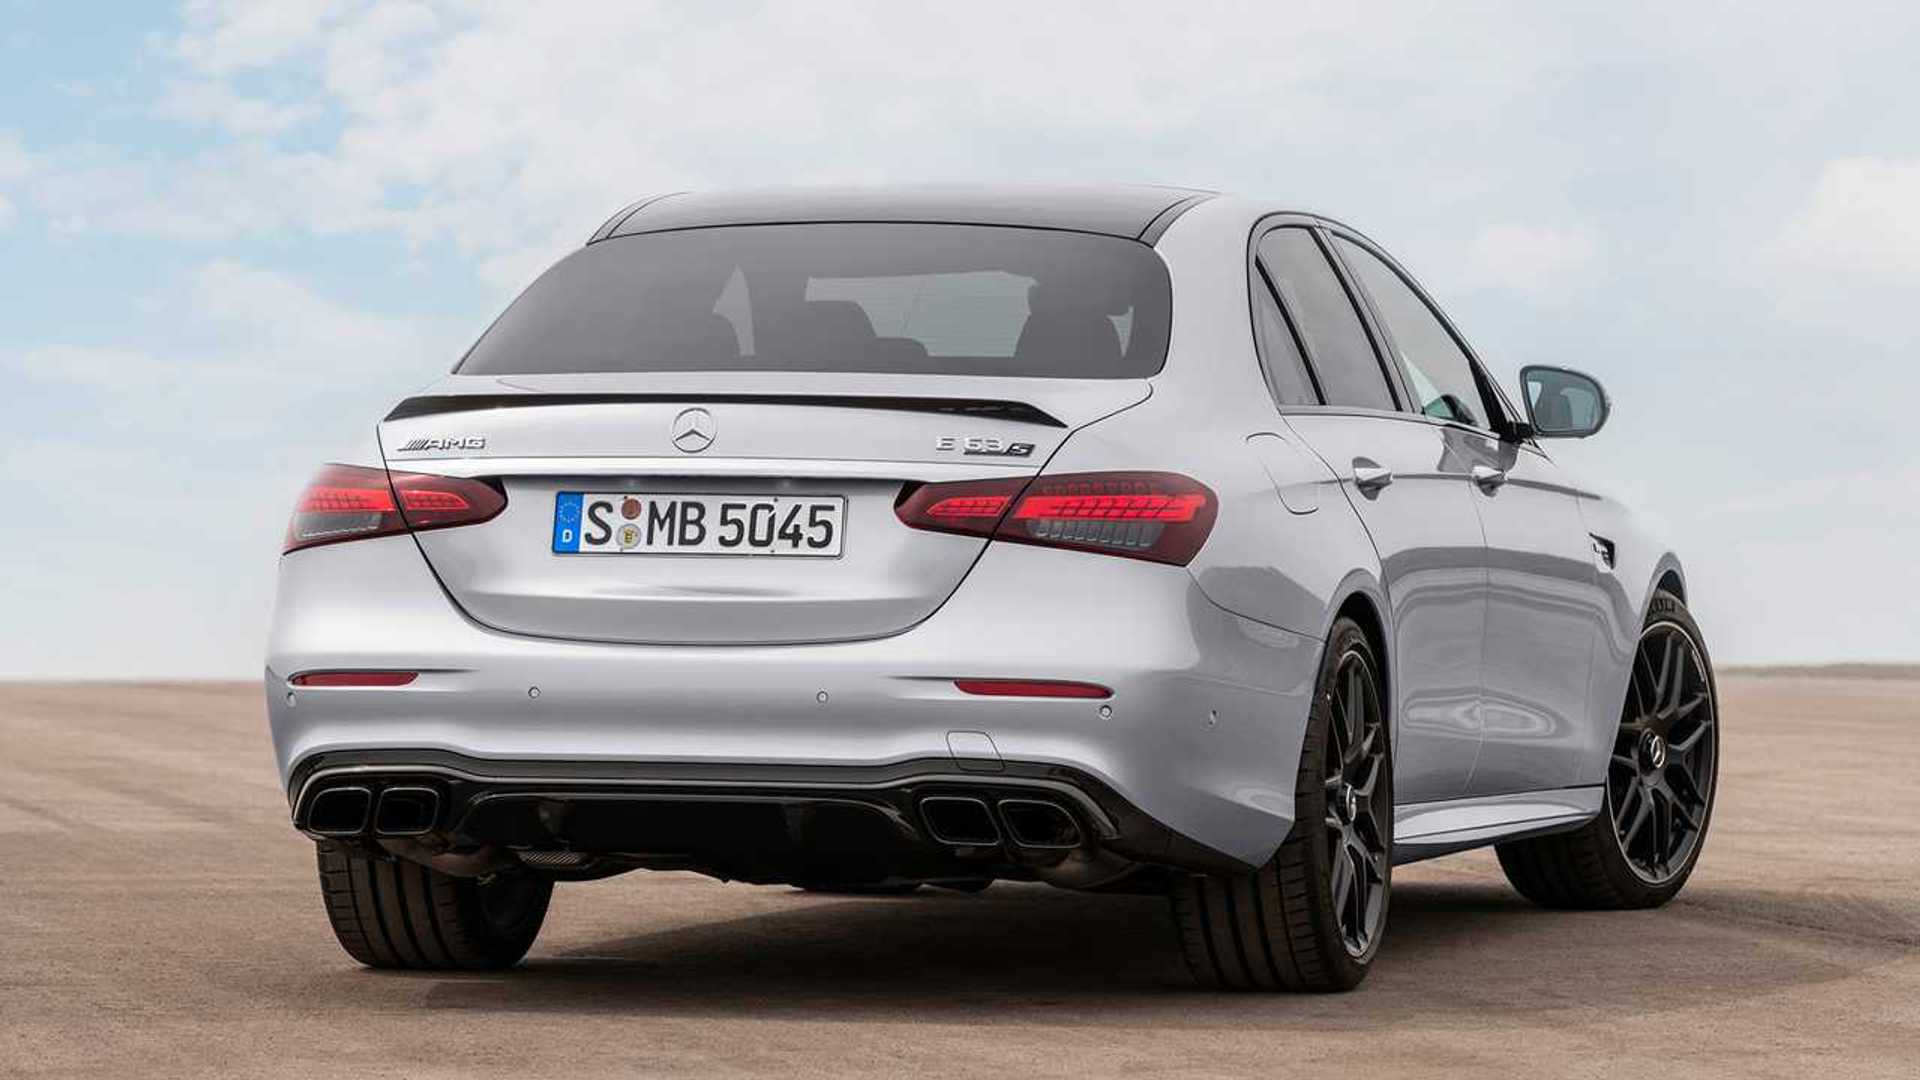 2021 Mercedes-AMG E63 S Shows It's Born To Conquer The Autobahn